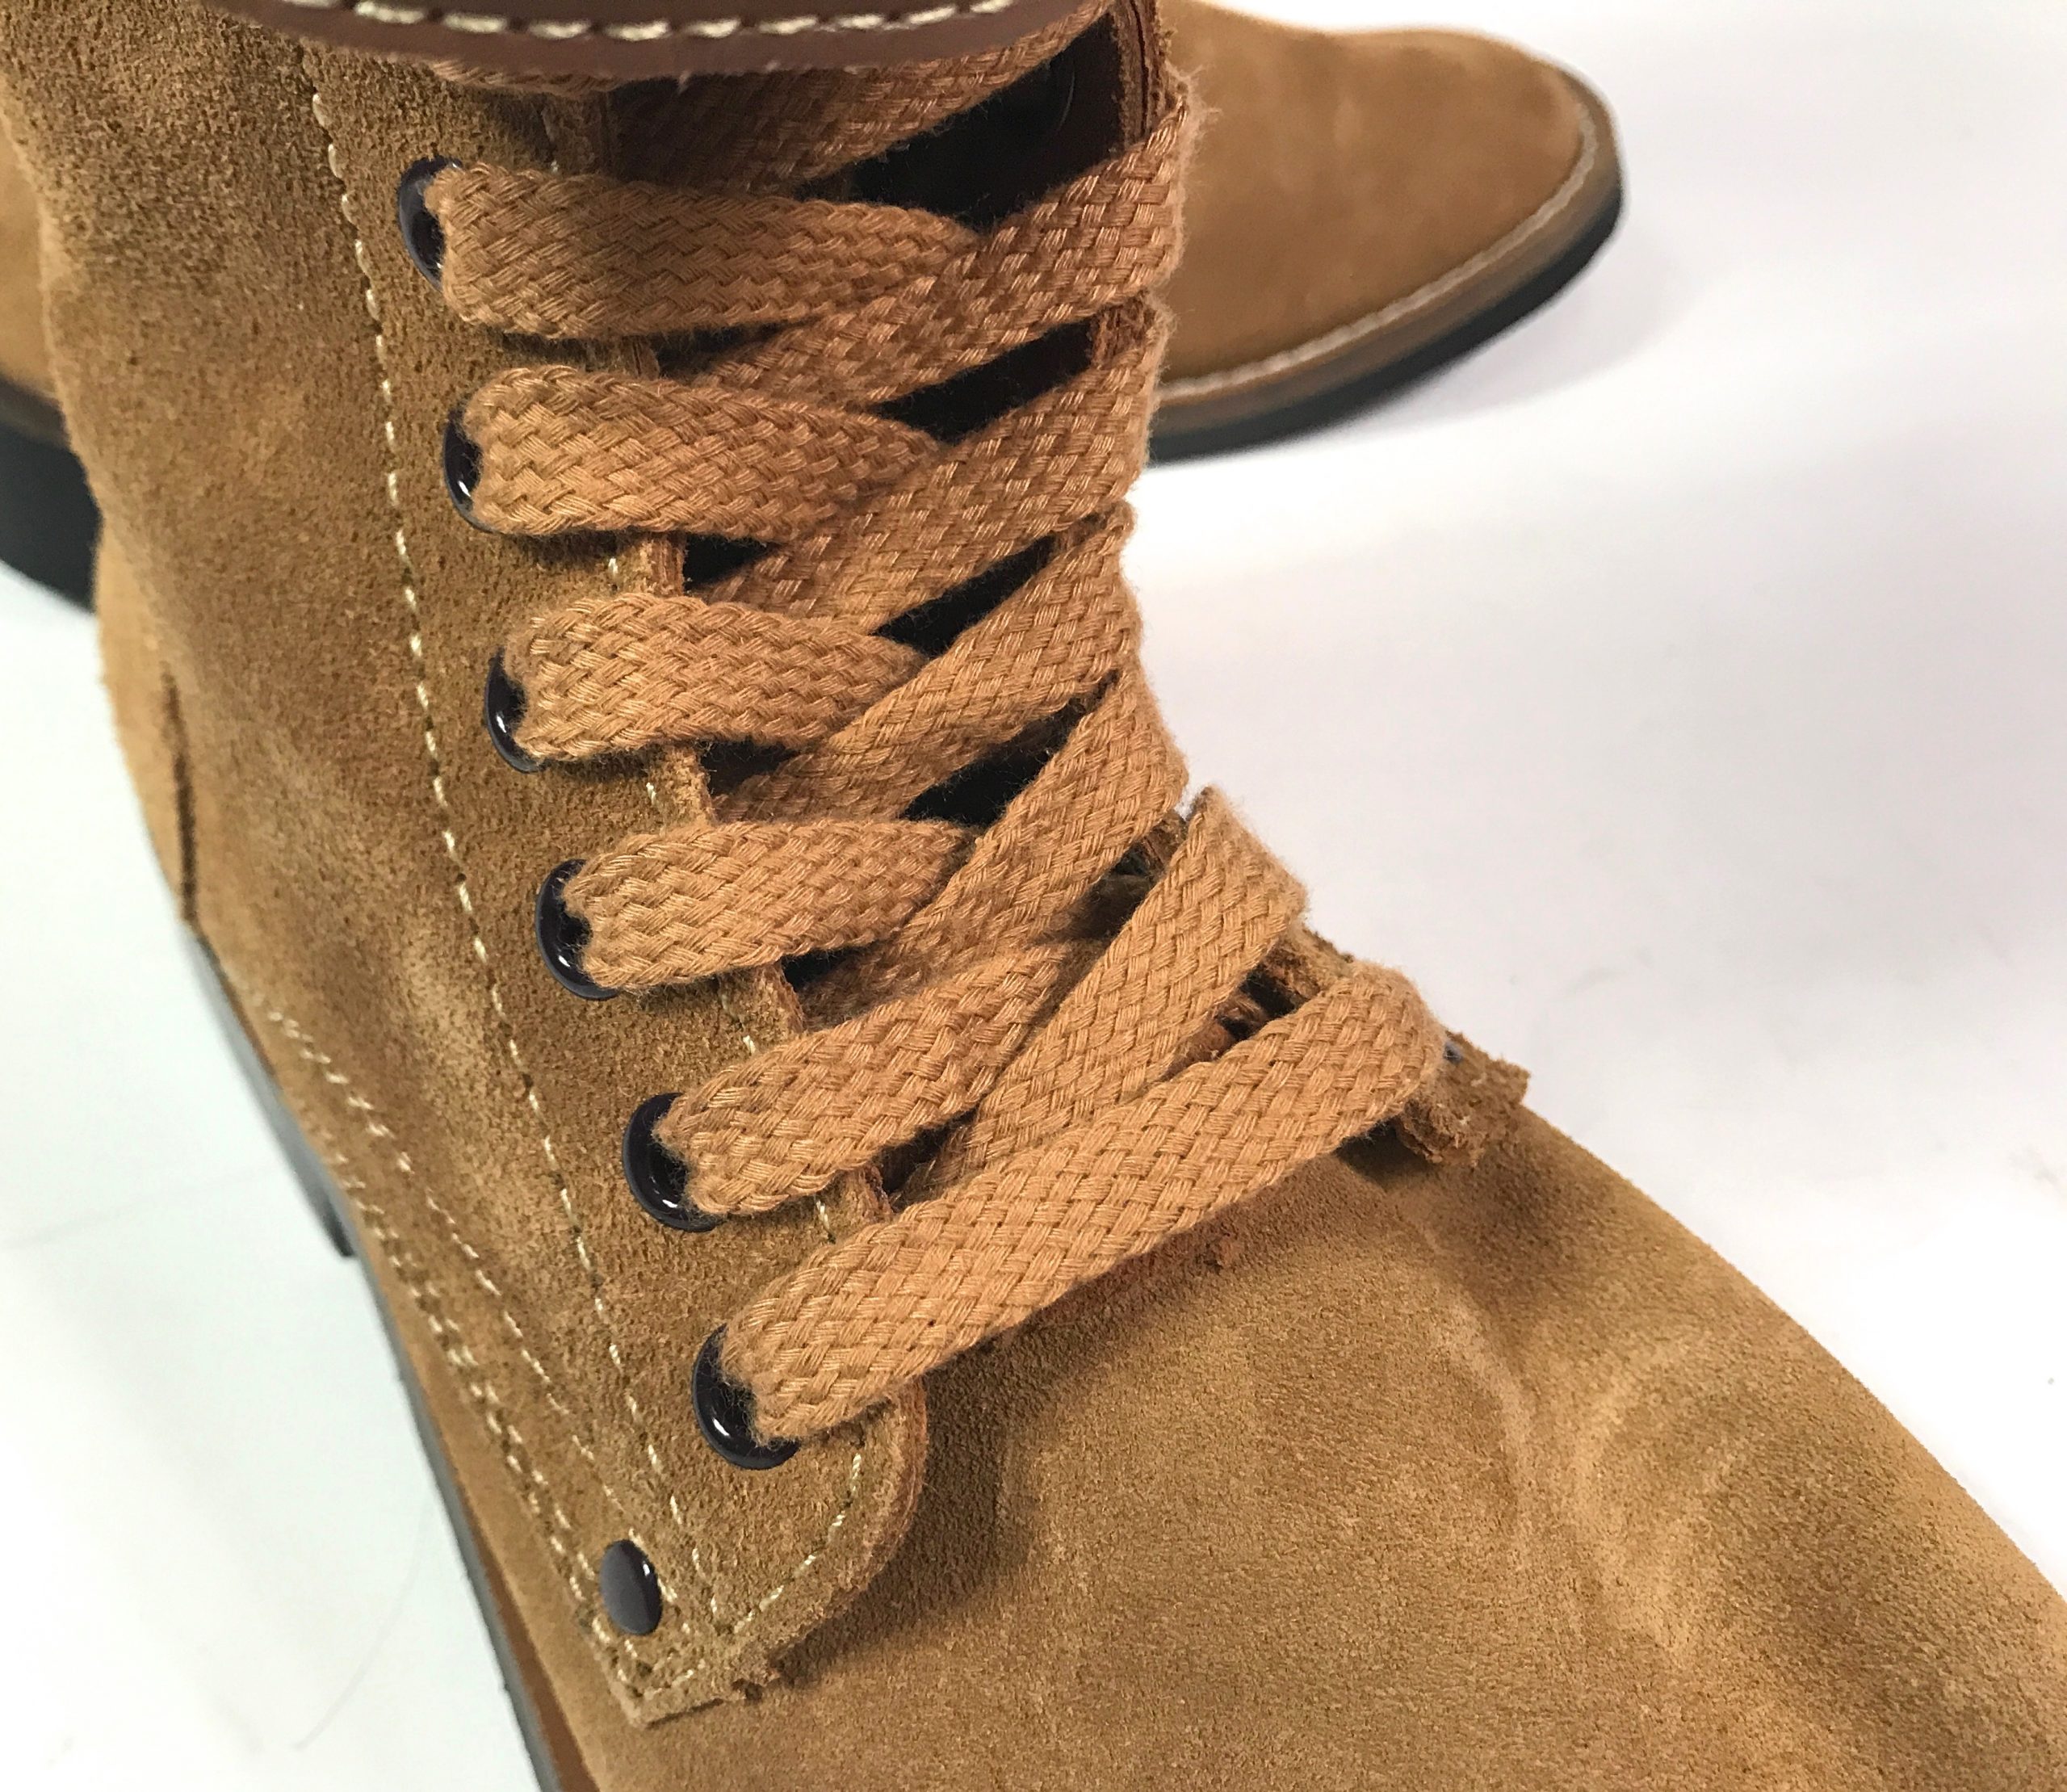 COMBAT SERVICE “DOUBLE BUCKLES” BOOTS | Man The Line